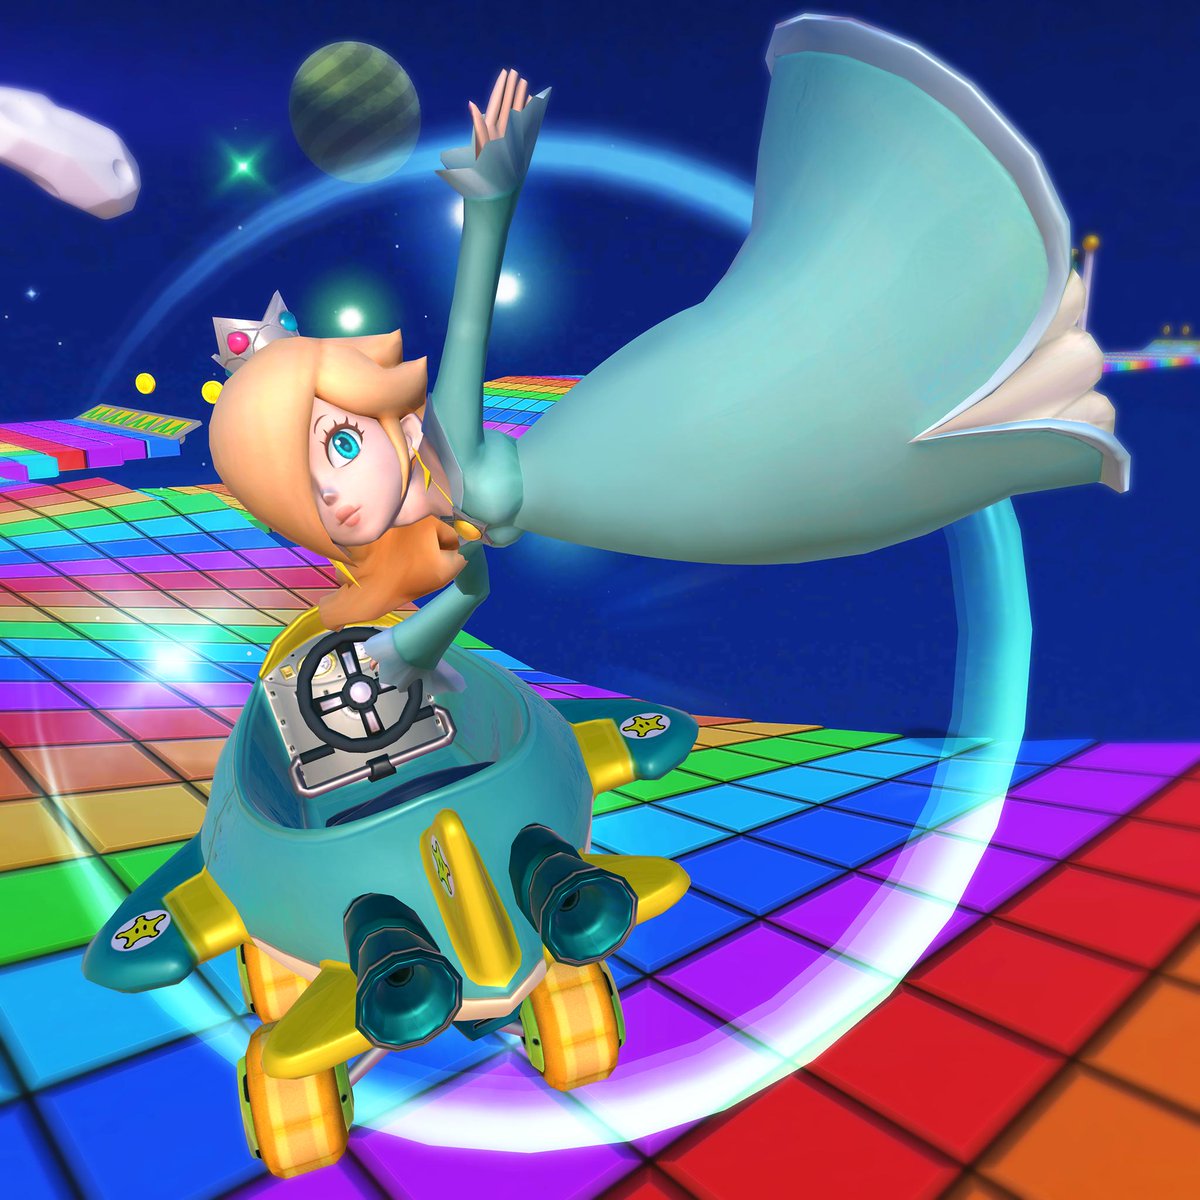 Rosalina plans on making her grand entrance and showing off her own Special Skill in the next tour! But what's that course in the background? It looks like a winding road made of colorful tiles…almost like a rainbow! #MarioKartTour